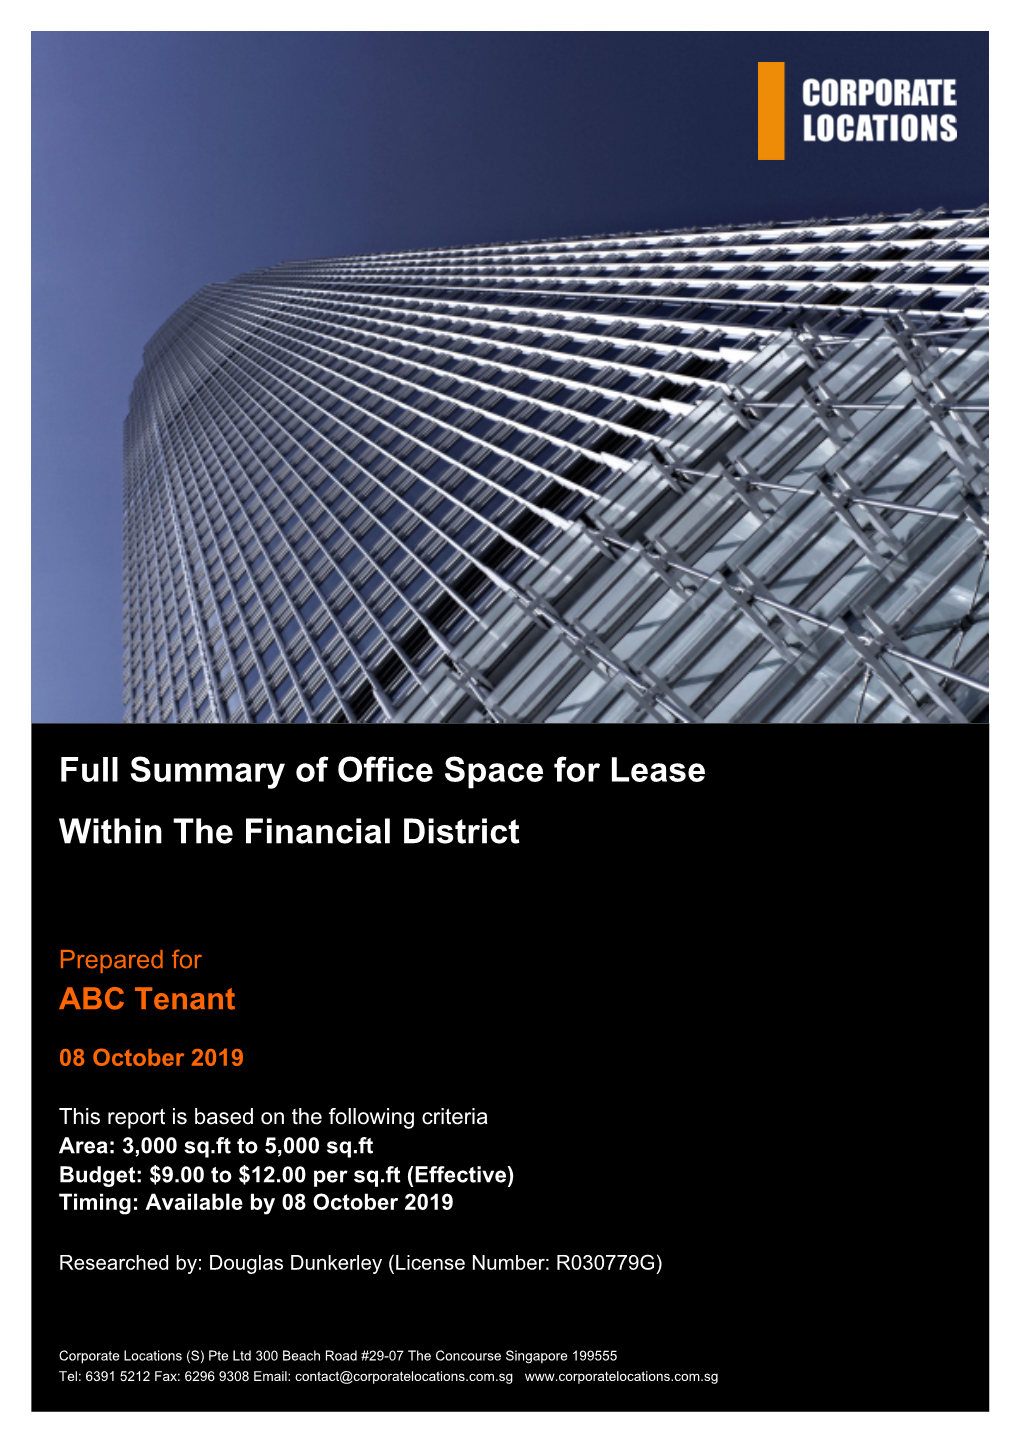 Full Summary of Office Space for Lease Within the Financial District